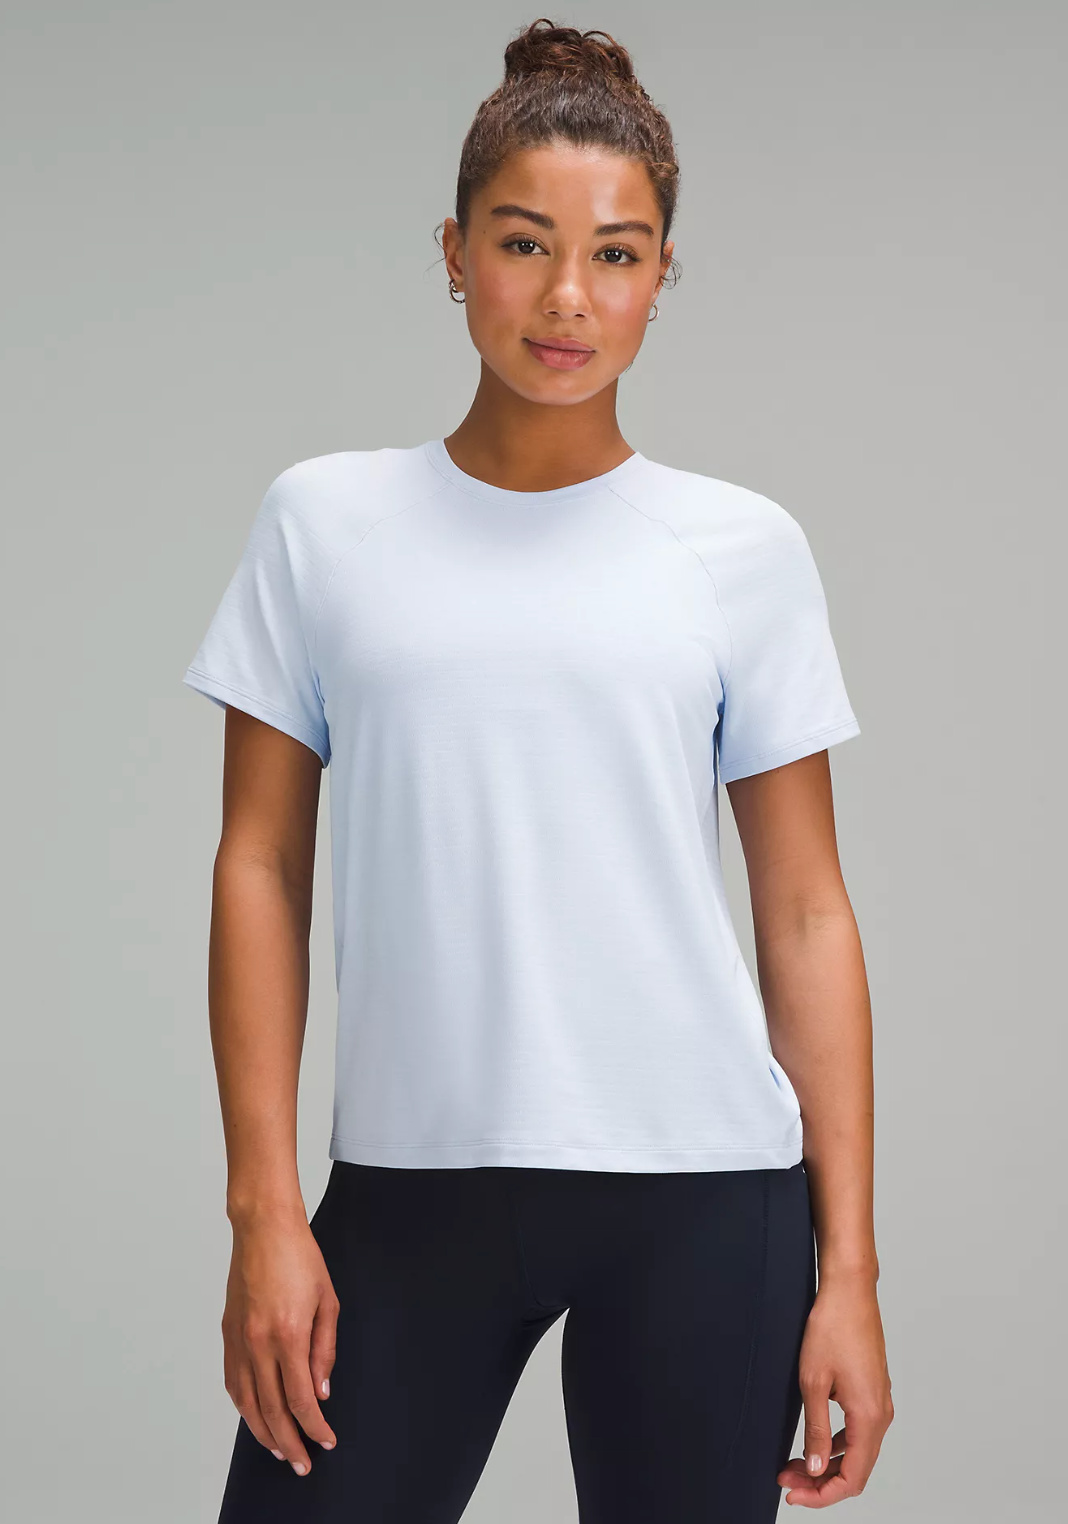 Best Moisture Wicking Shirts for Women: Stay Cool While Traveling